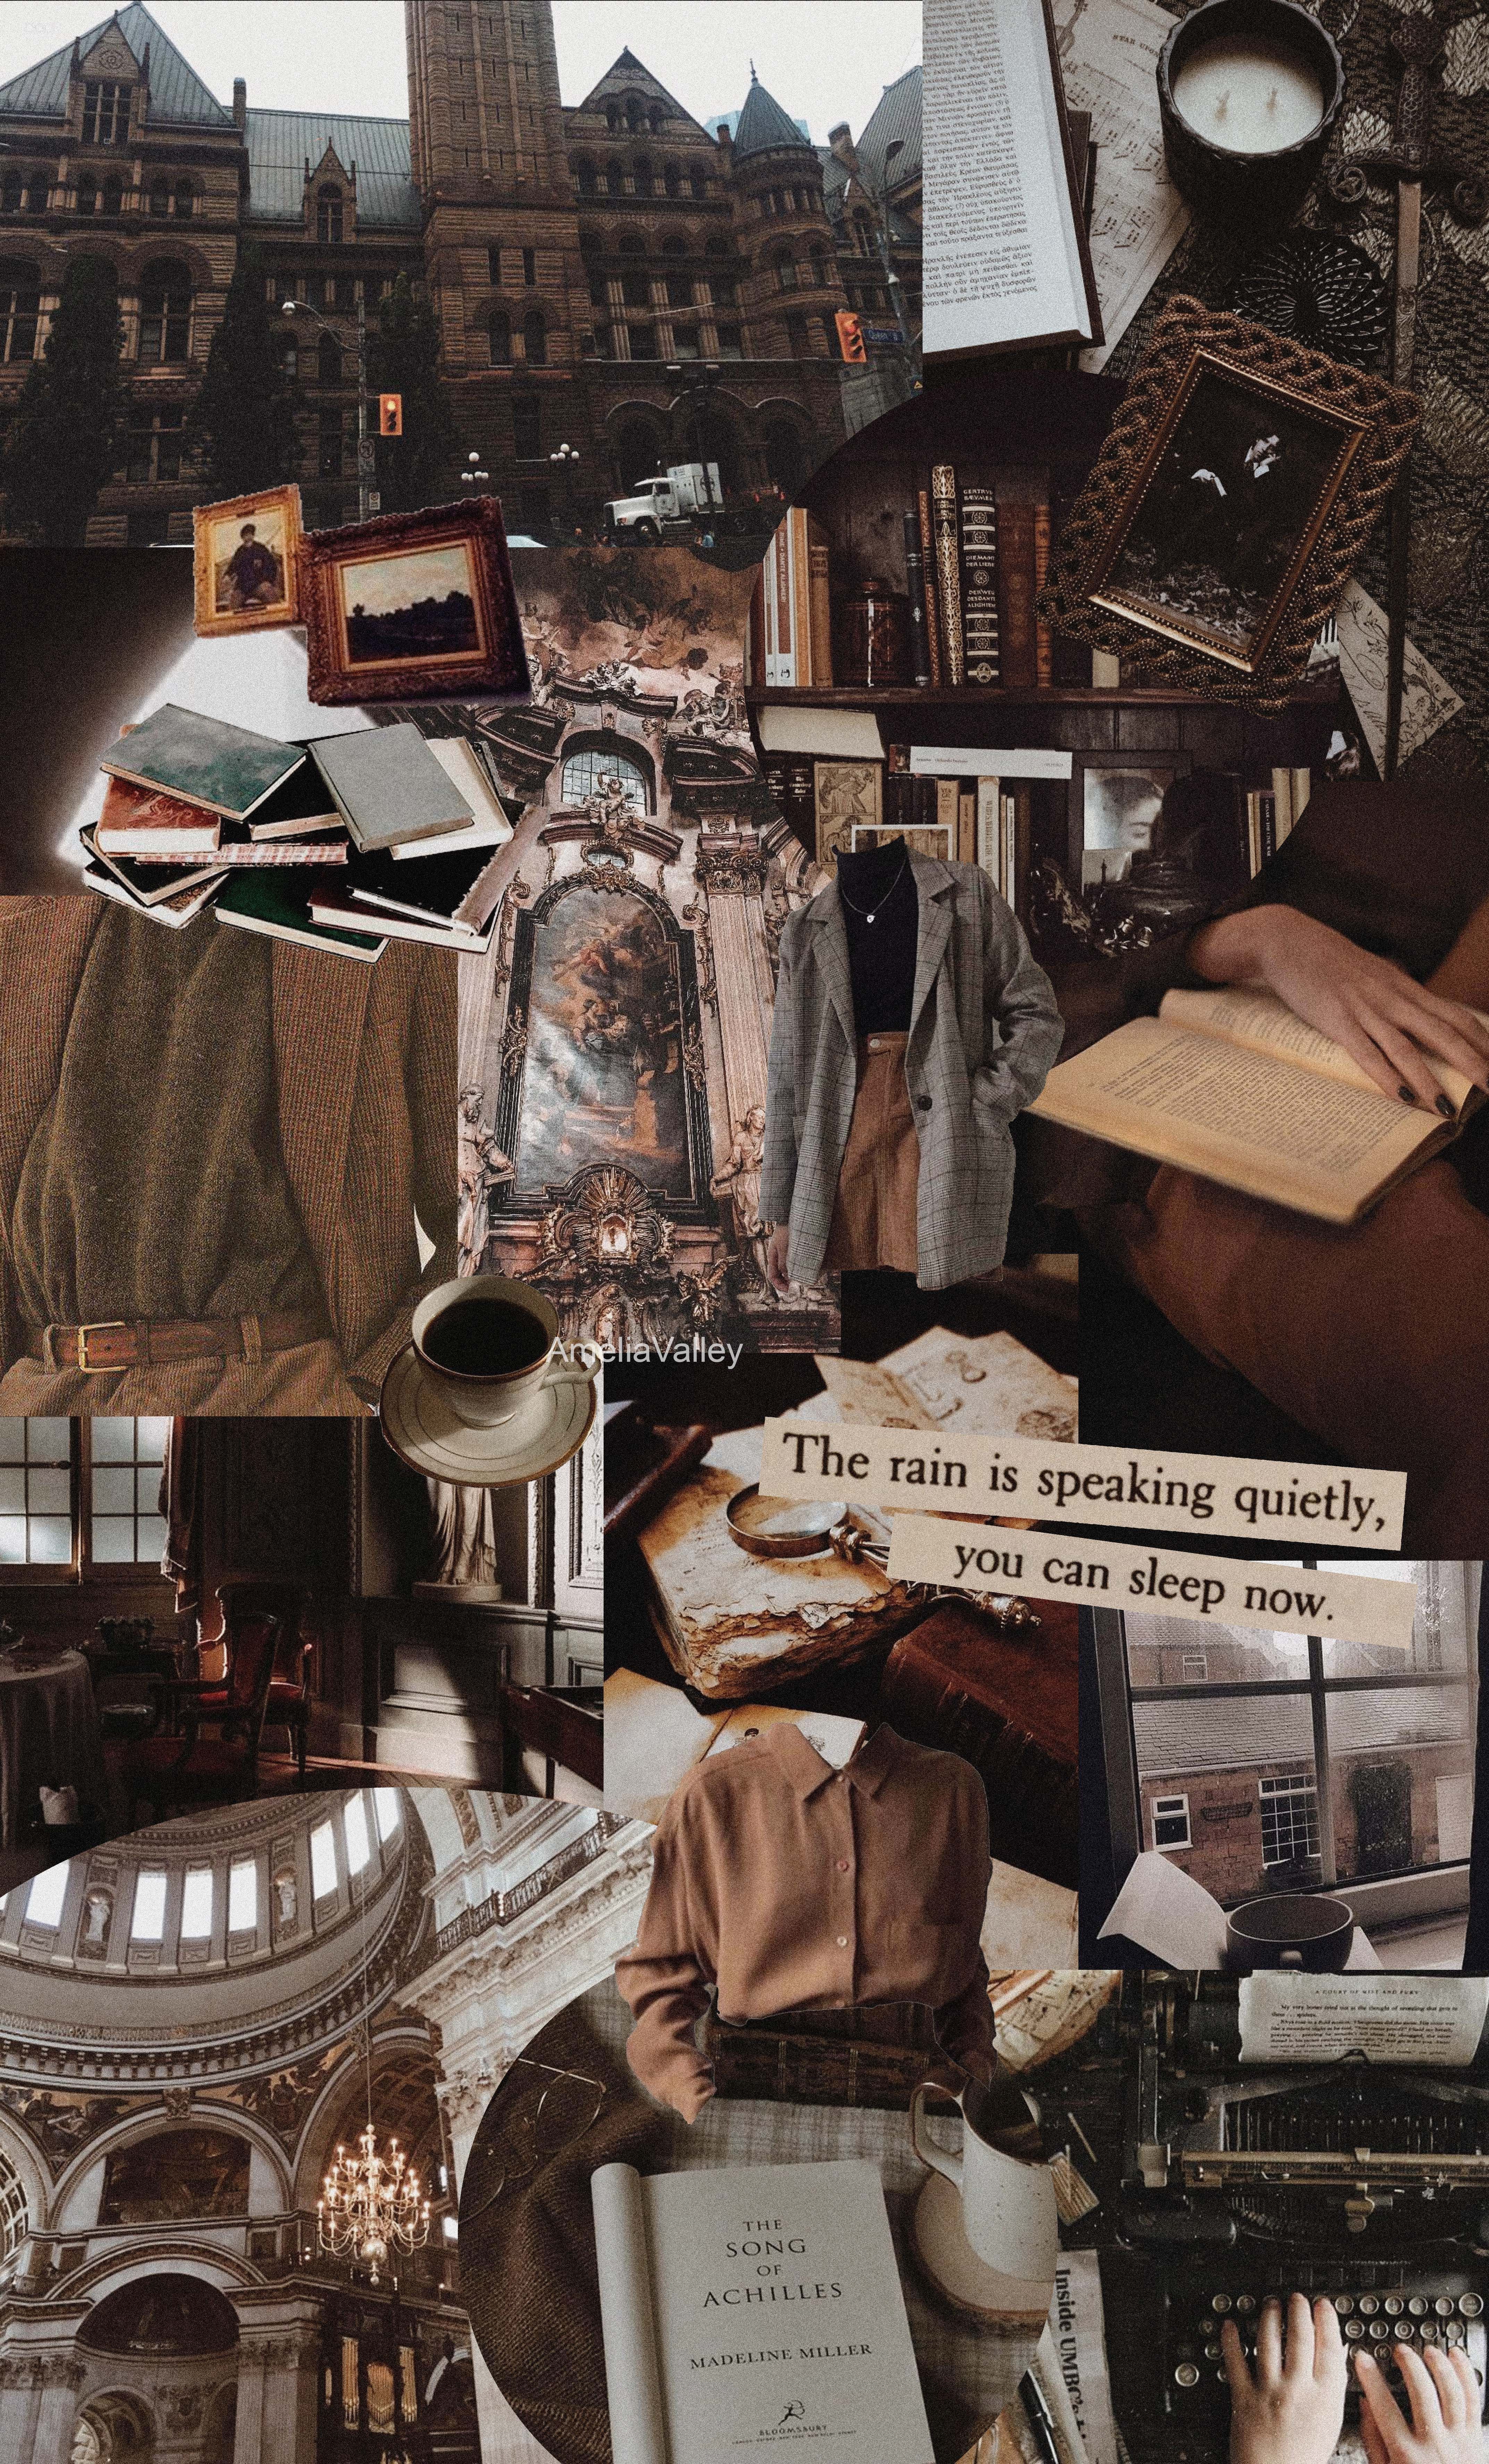 Aesthetic collage of vintage books, brown suit jackets, a cathedral, and a typewriter. - Dark academia